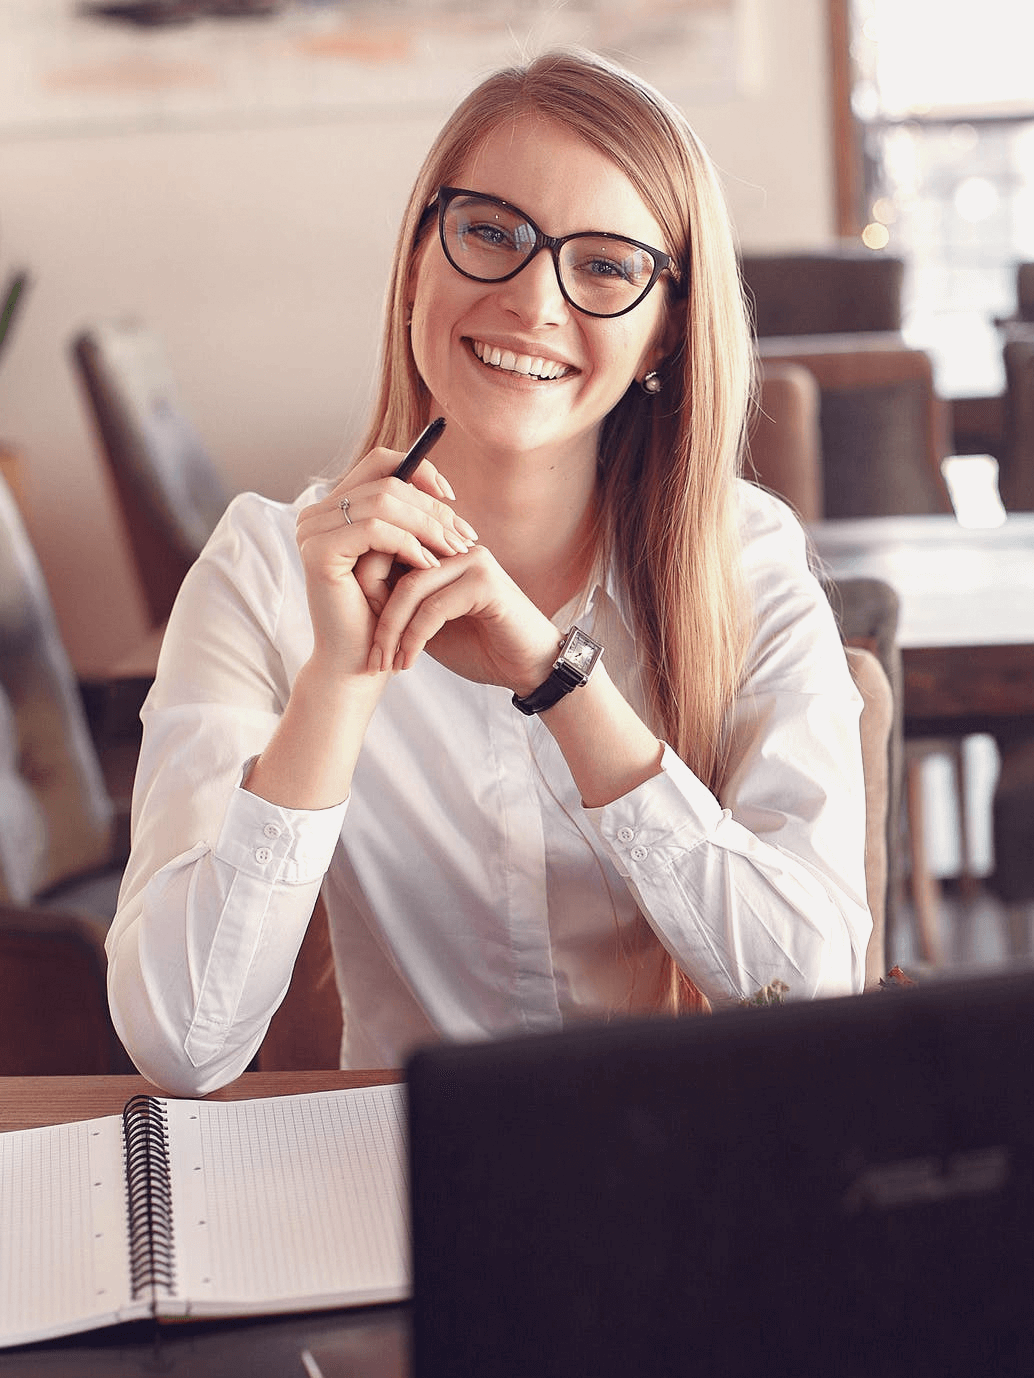 Girl in an office smiling